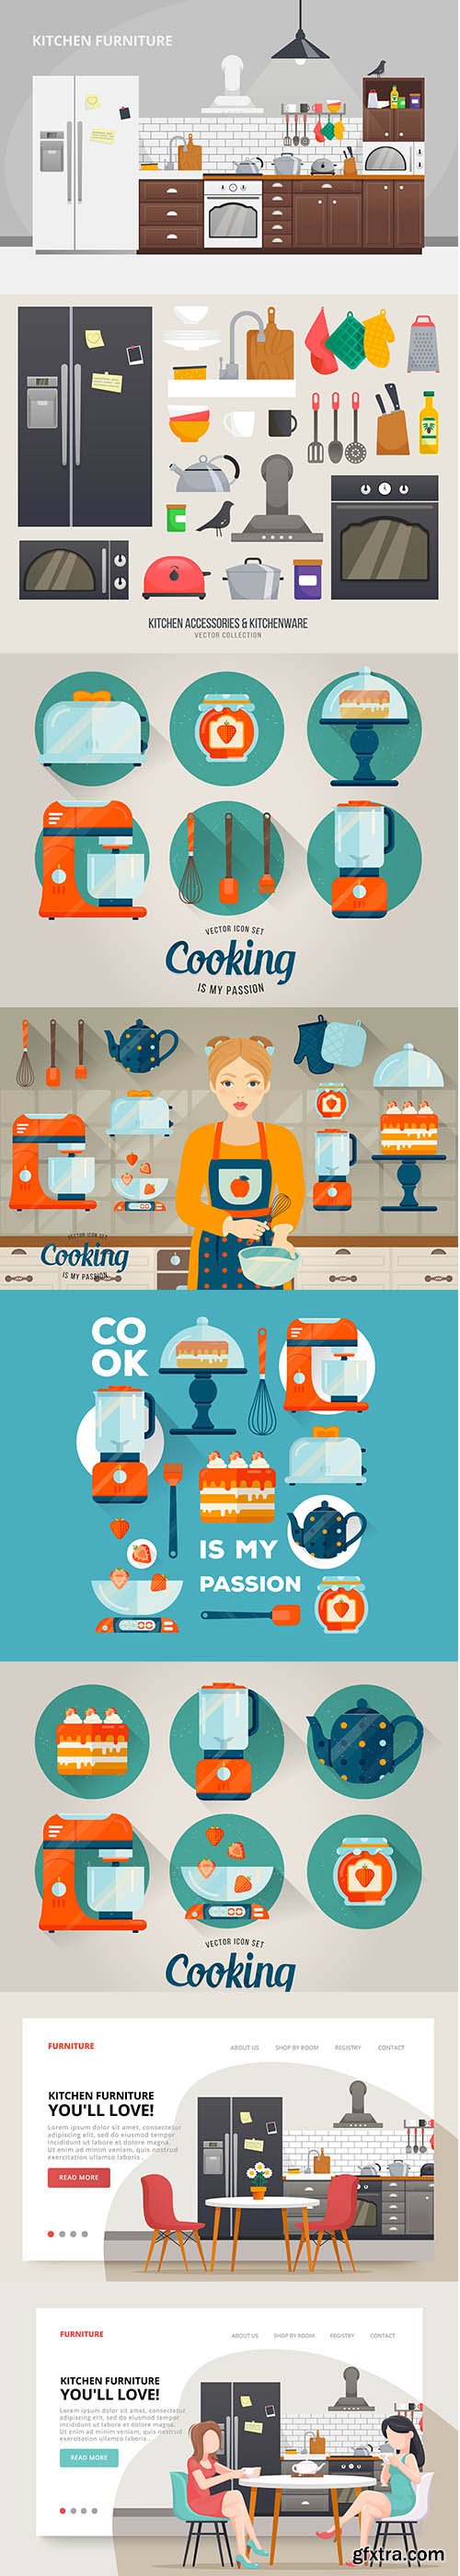 Collection of Furniture Kitchen Elements and Icons